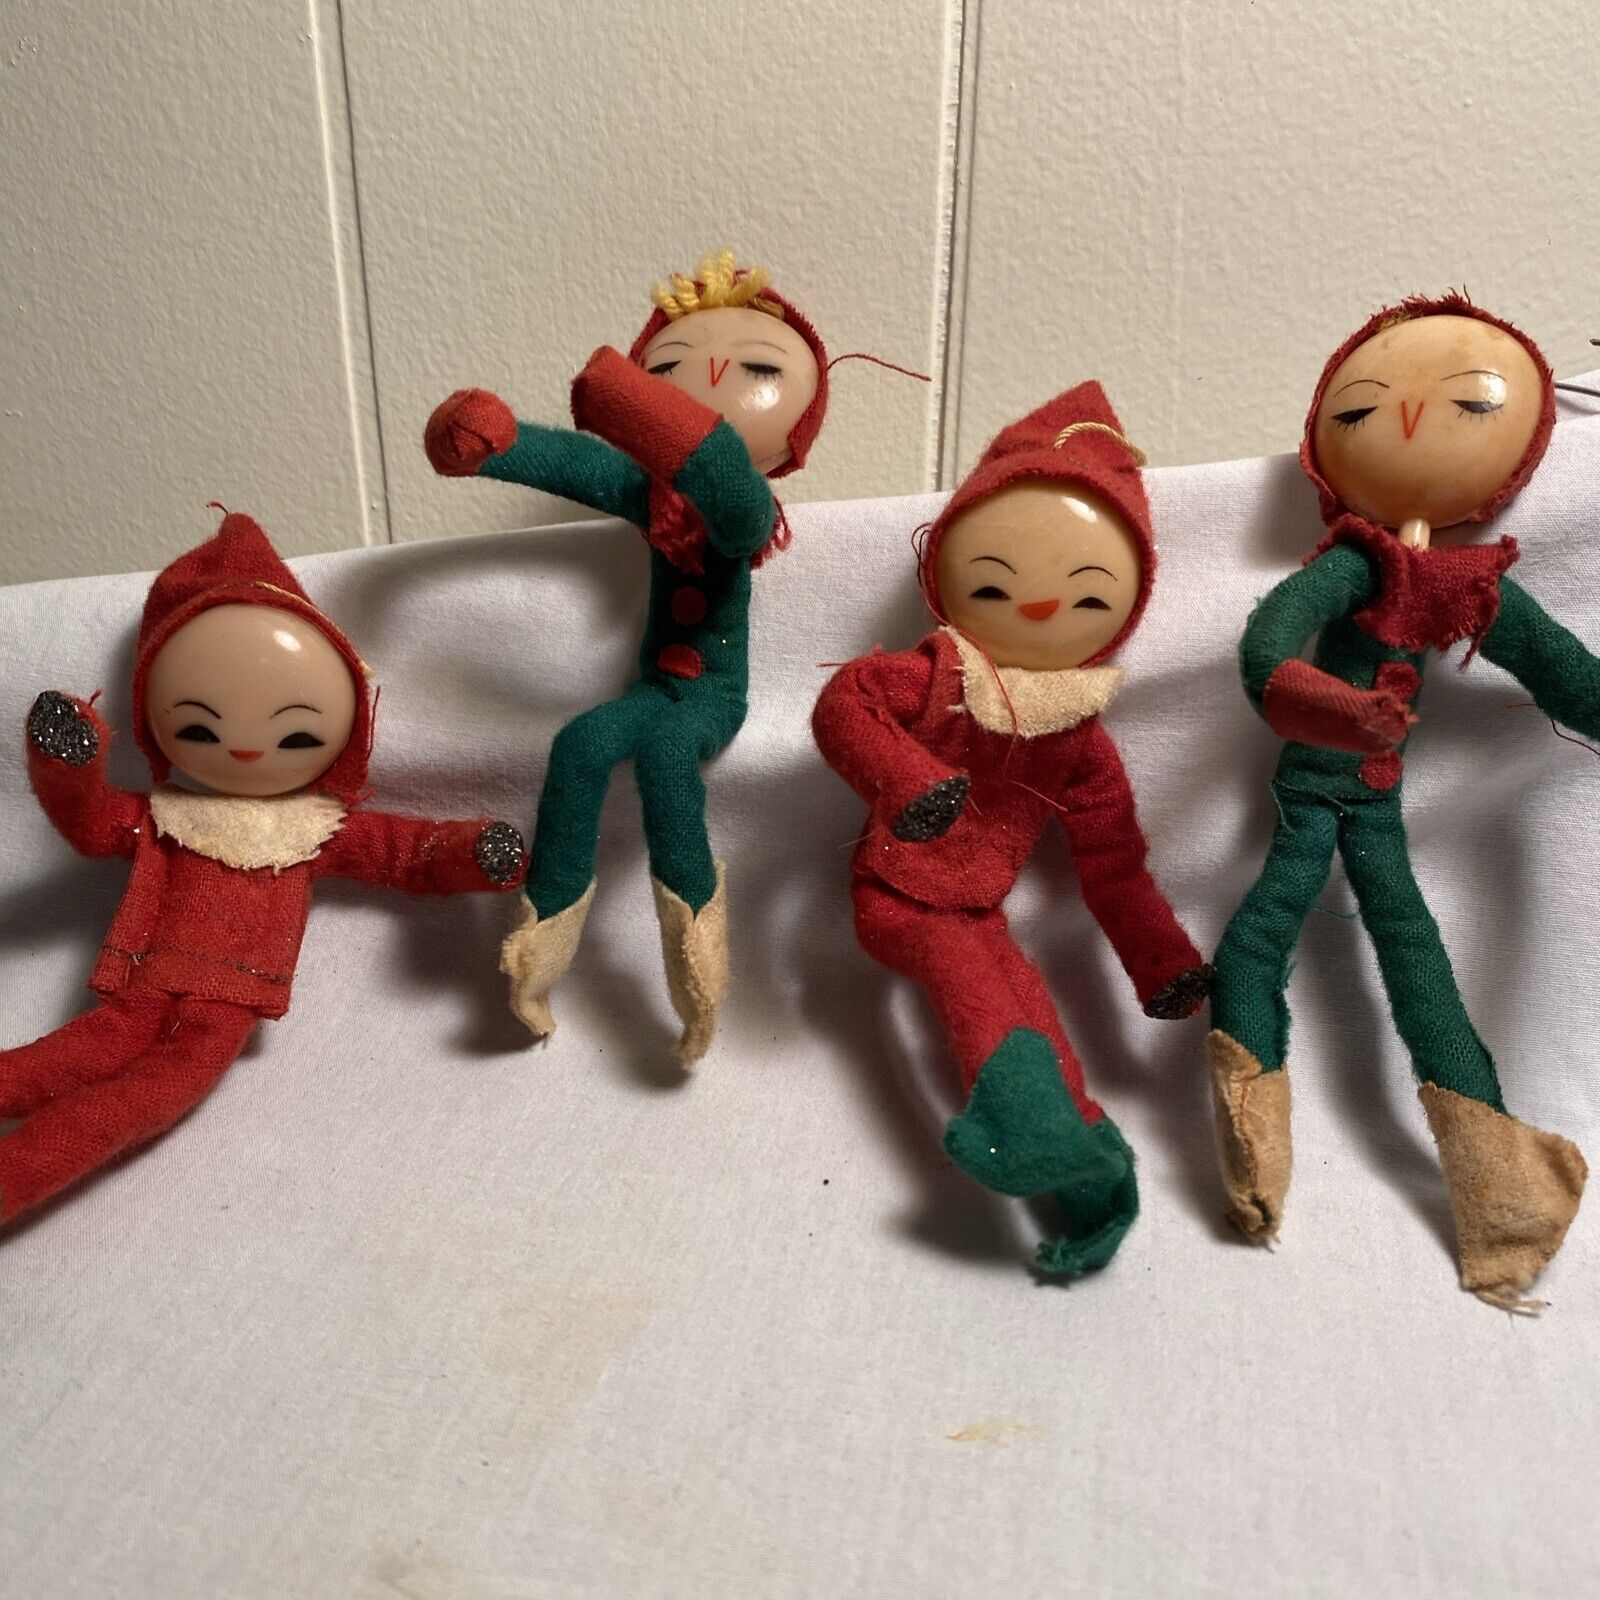 4 1950’s Vintage Pixie Elf Christmas Ornament Made In Japan Red Green Felt